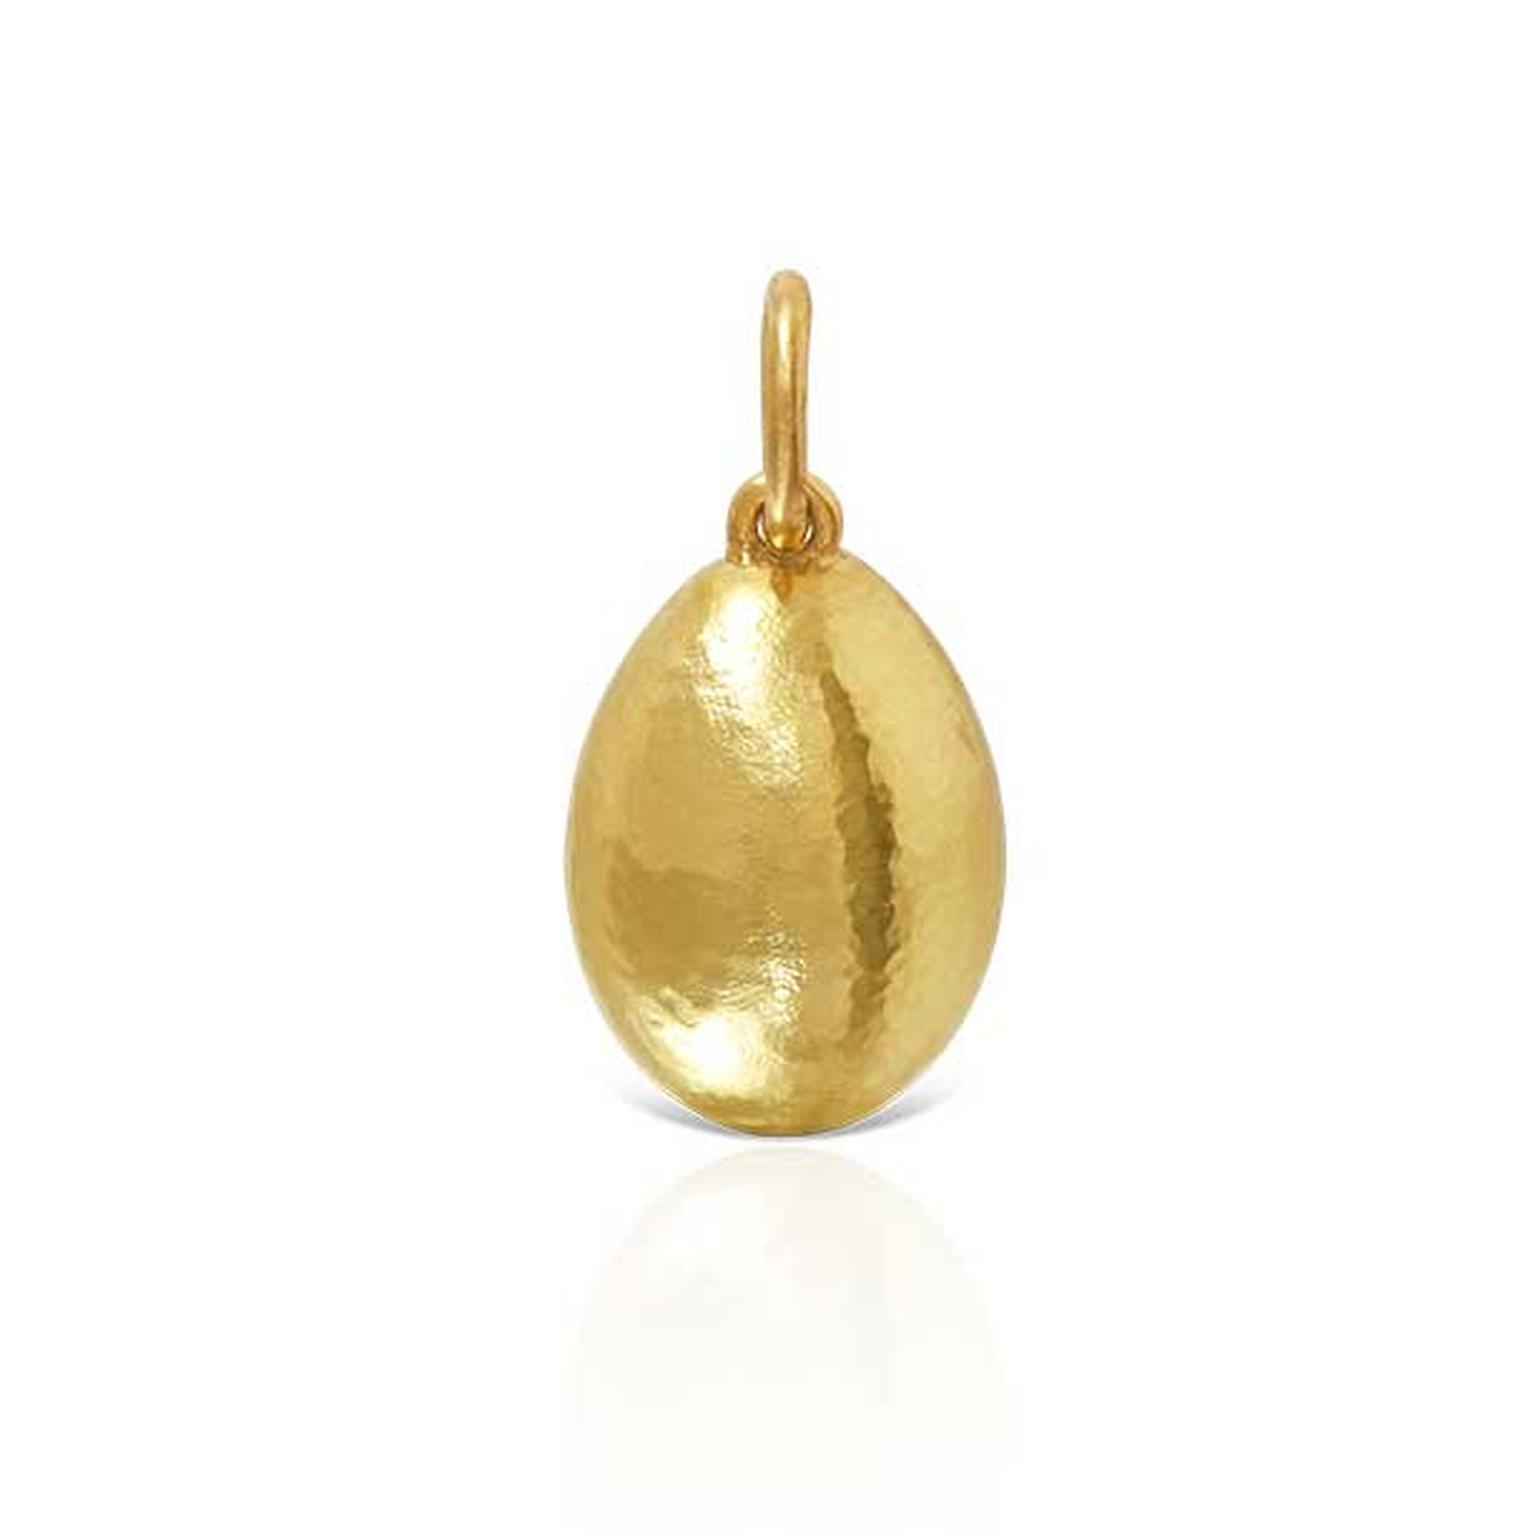 Lalaounis Easter egg pendant in hammered 18-carat yellow gold